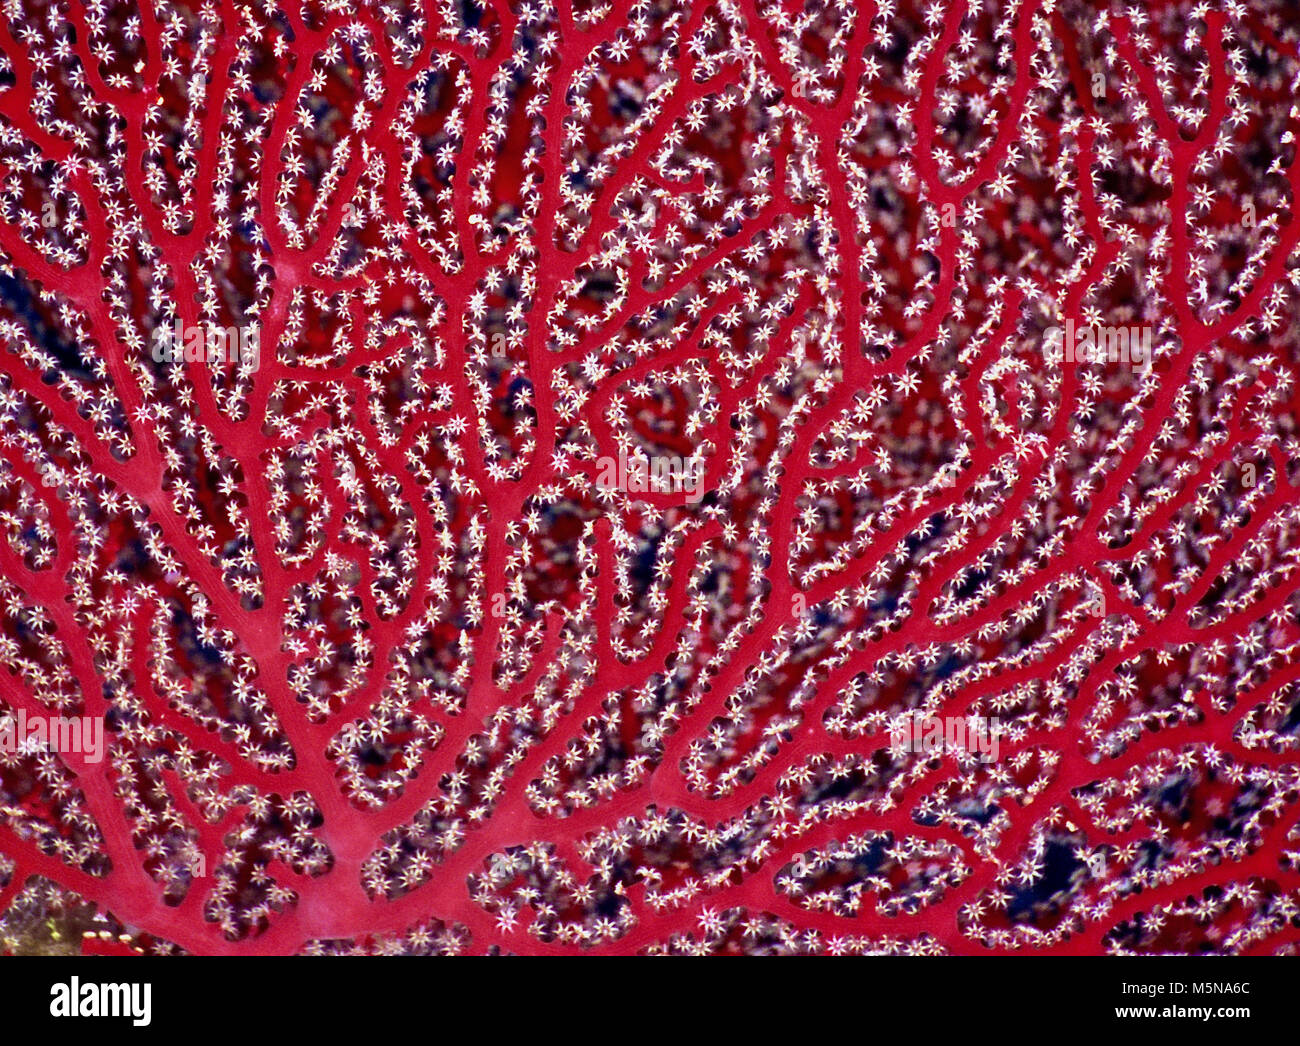 This is a close-up picture of part of a red gorgonian coral (Acabaria splendens). Its hundreds of eight-tentacled polyps are extended fully in order to catch microplankton. I feel that this colony of tiny delicate animals, living in their communal skeleton, serves to illustrate the extreme fragility and beauty of tropical and sub-tropical coral reefs. Very sadly, such reefs are dying. They are the most vulnerable of our planet's ecosystems and have very limited capacity to adapt to rising water temperatures and acidification. As such, they are key indicators of climate change. Egyptian Red Sea Stock Photo